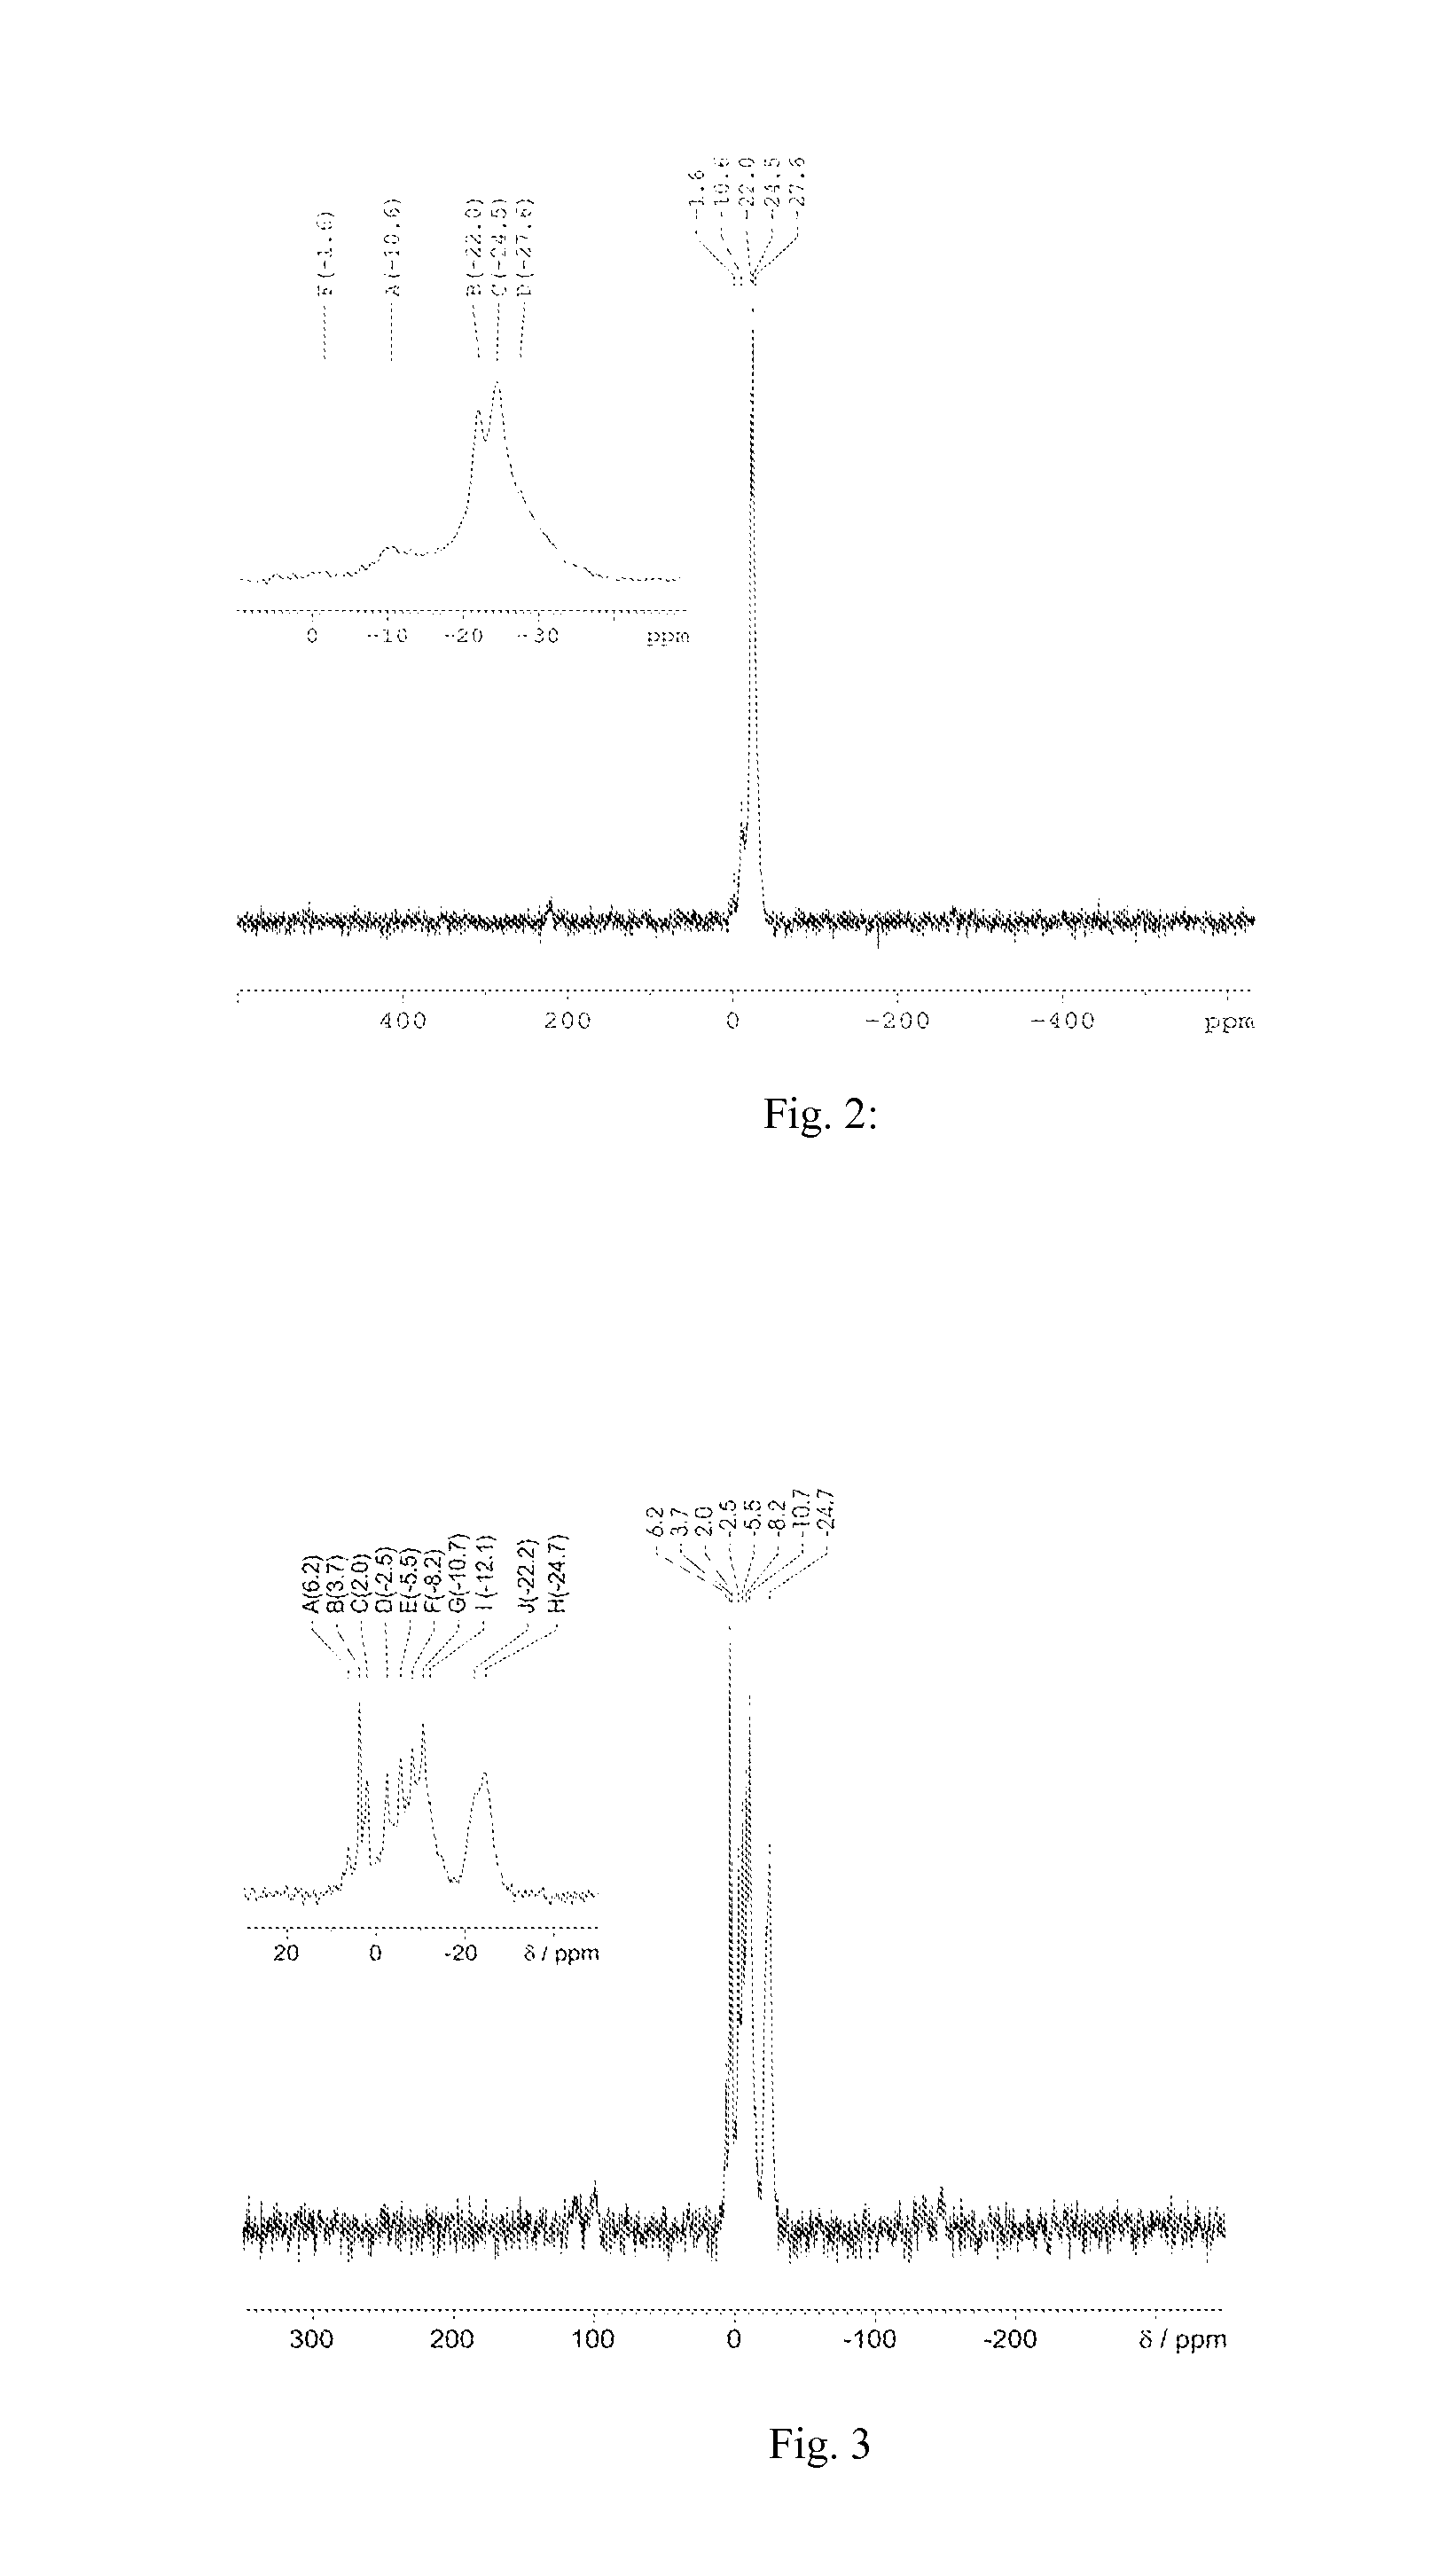 Flame protection agent compositions containing triazine intercalated metal phosphates